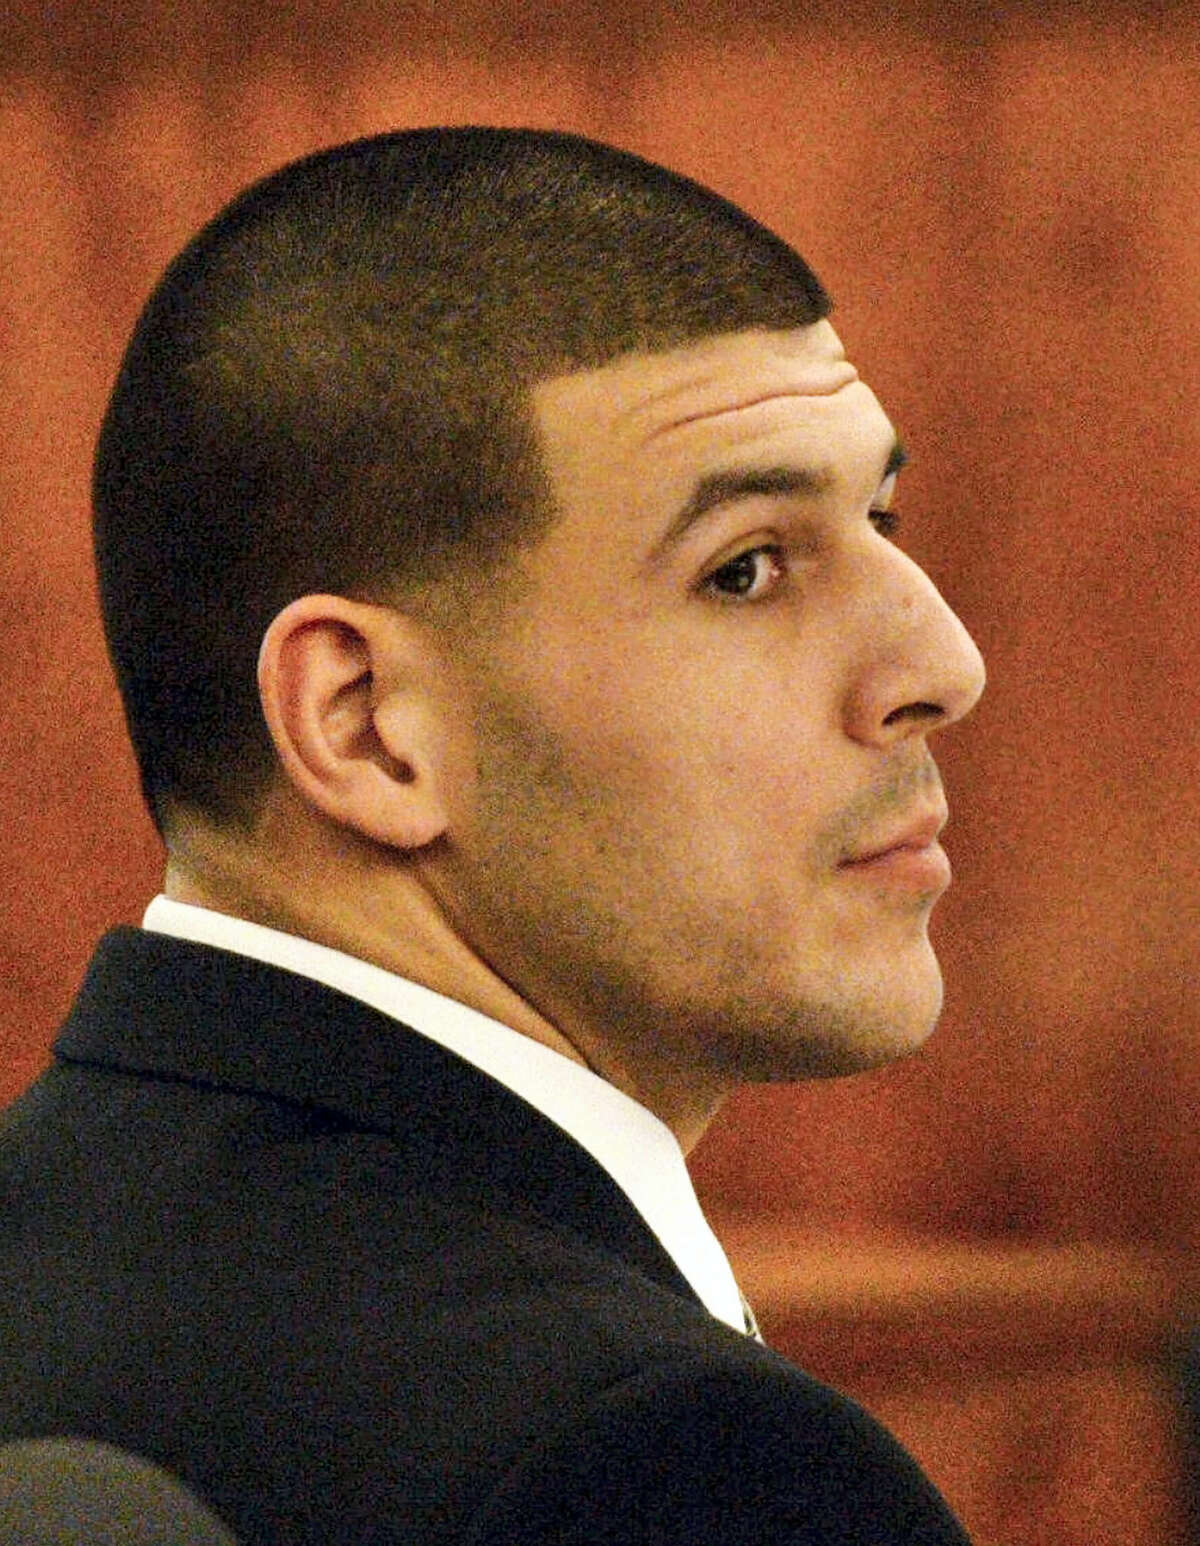 Former New England Patriots football player Aaron Hernandez listens to testimony during his murder trial, Friday, Jan. 30, 2015, in Fall River, Mass. Hernandez is charged with killing semiprofessional football player Odin Lloyd, 27, in June 2013.